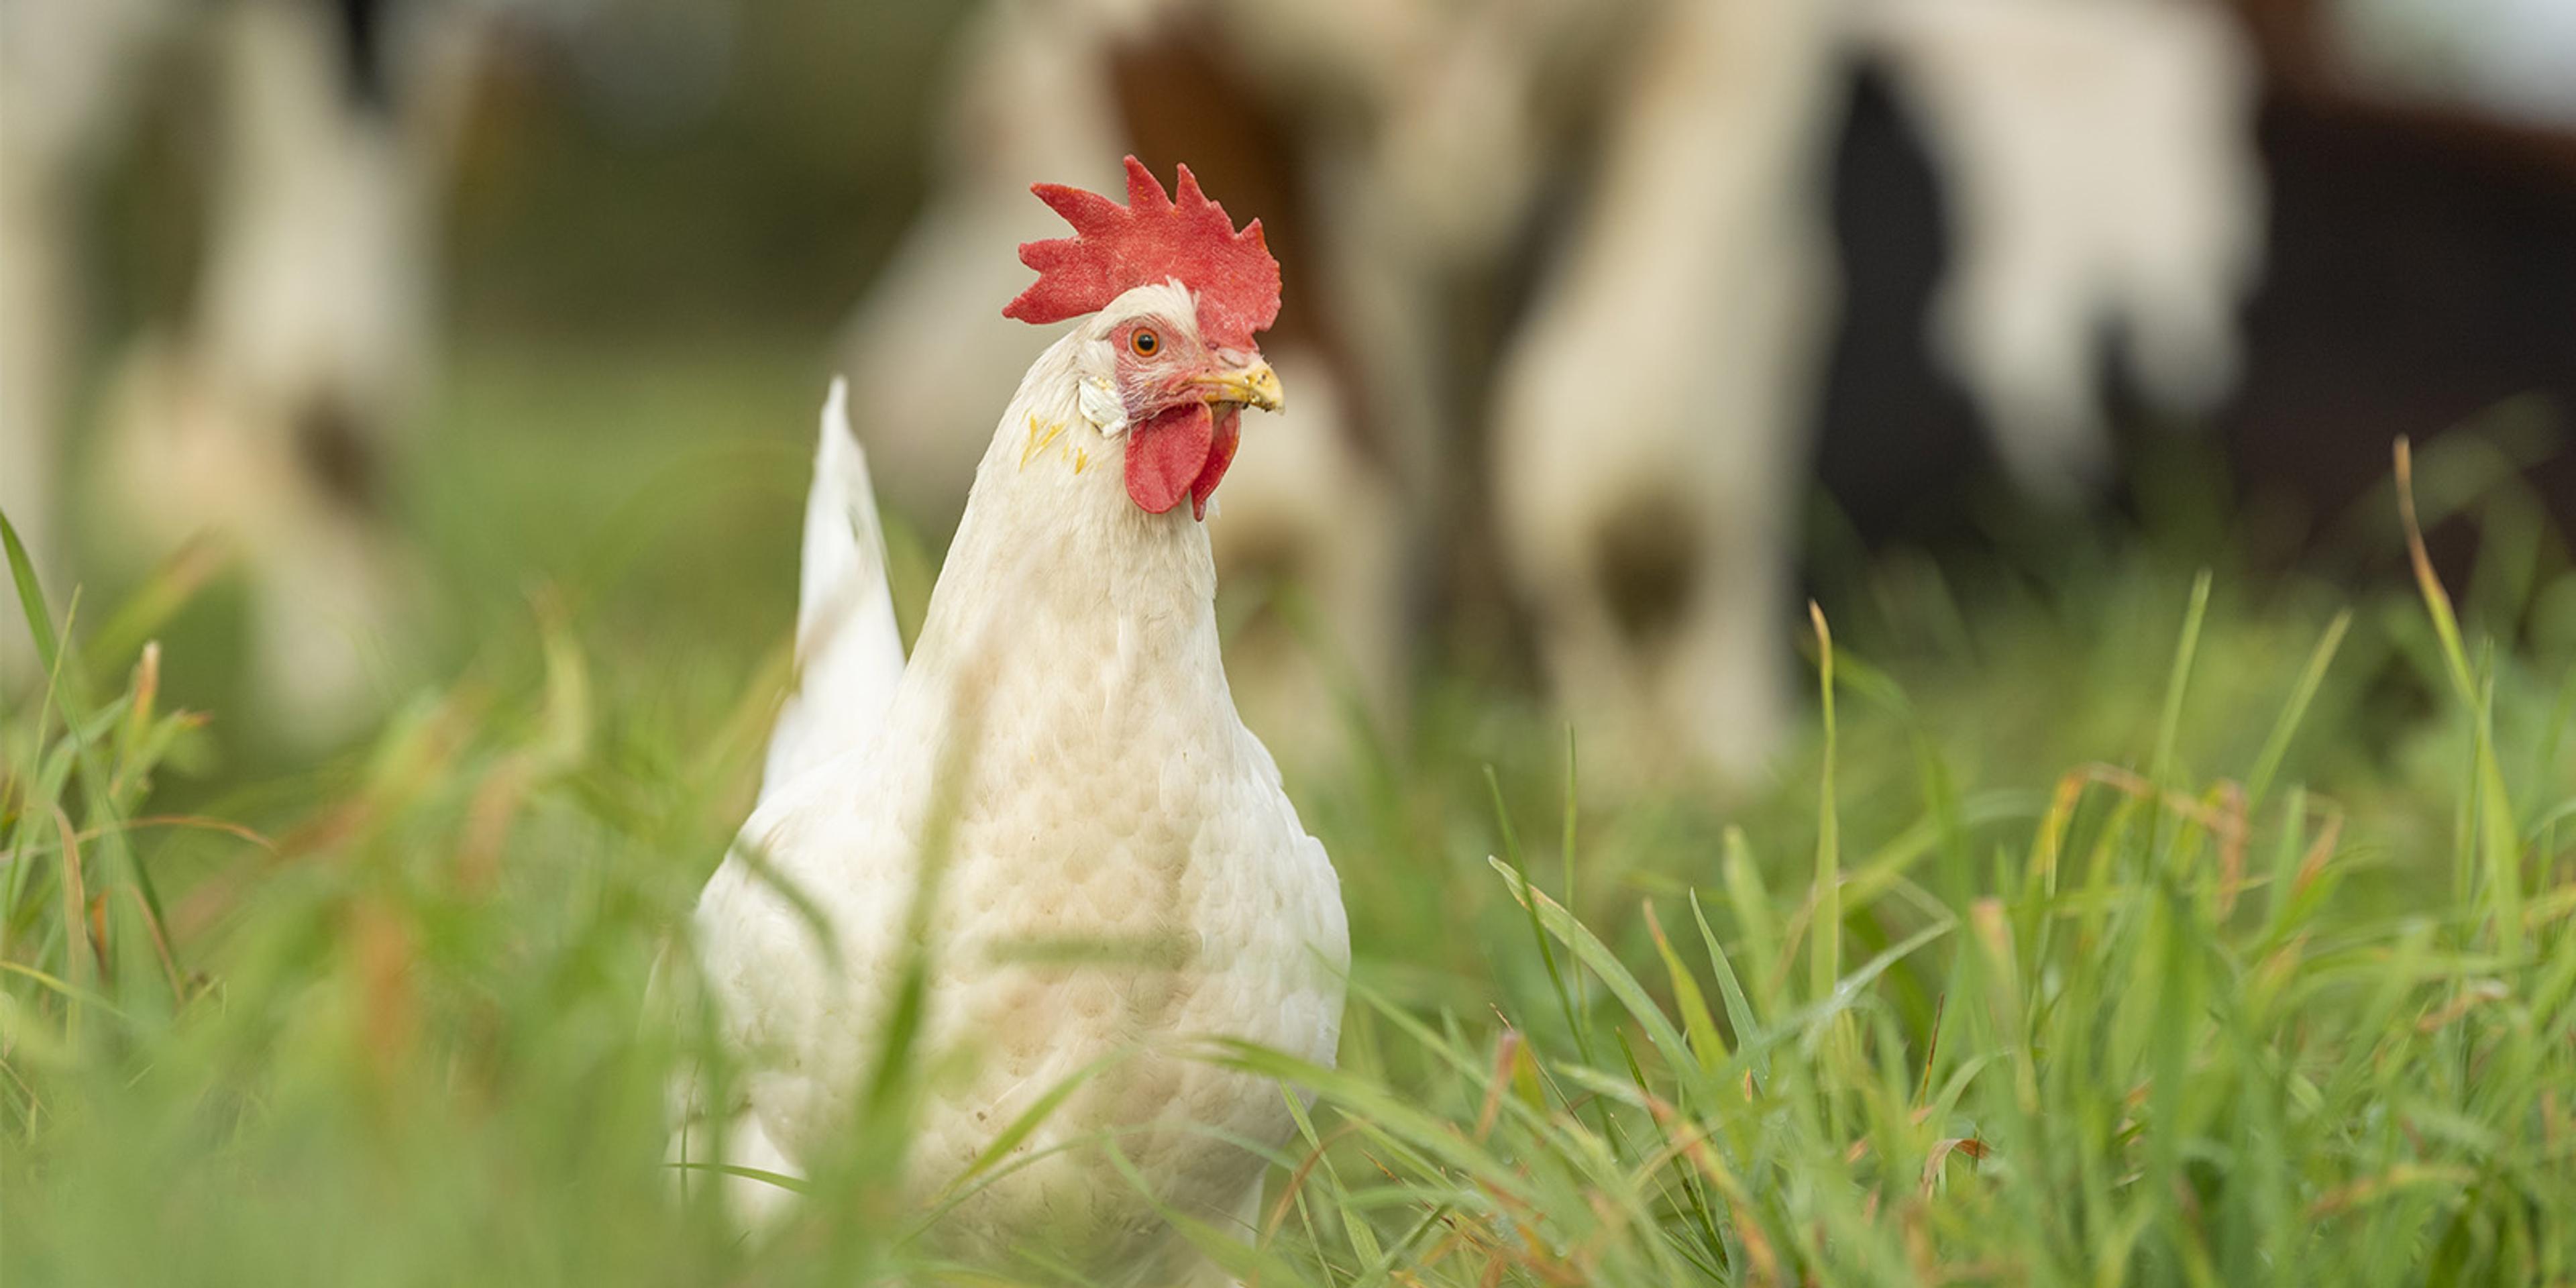 Chickens and cows mingle on the Johnson family’s organic farm in Wisconsin.